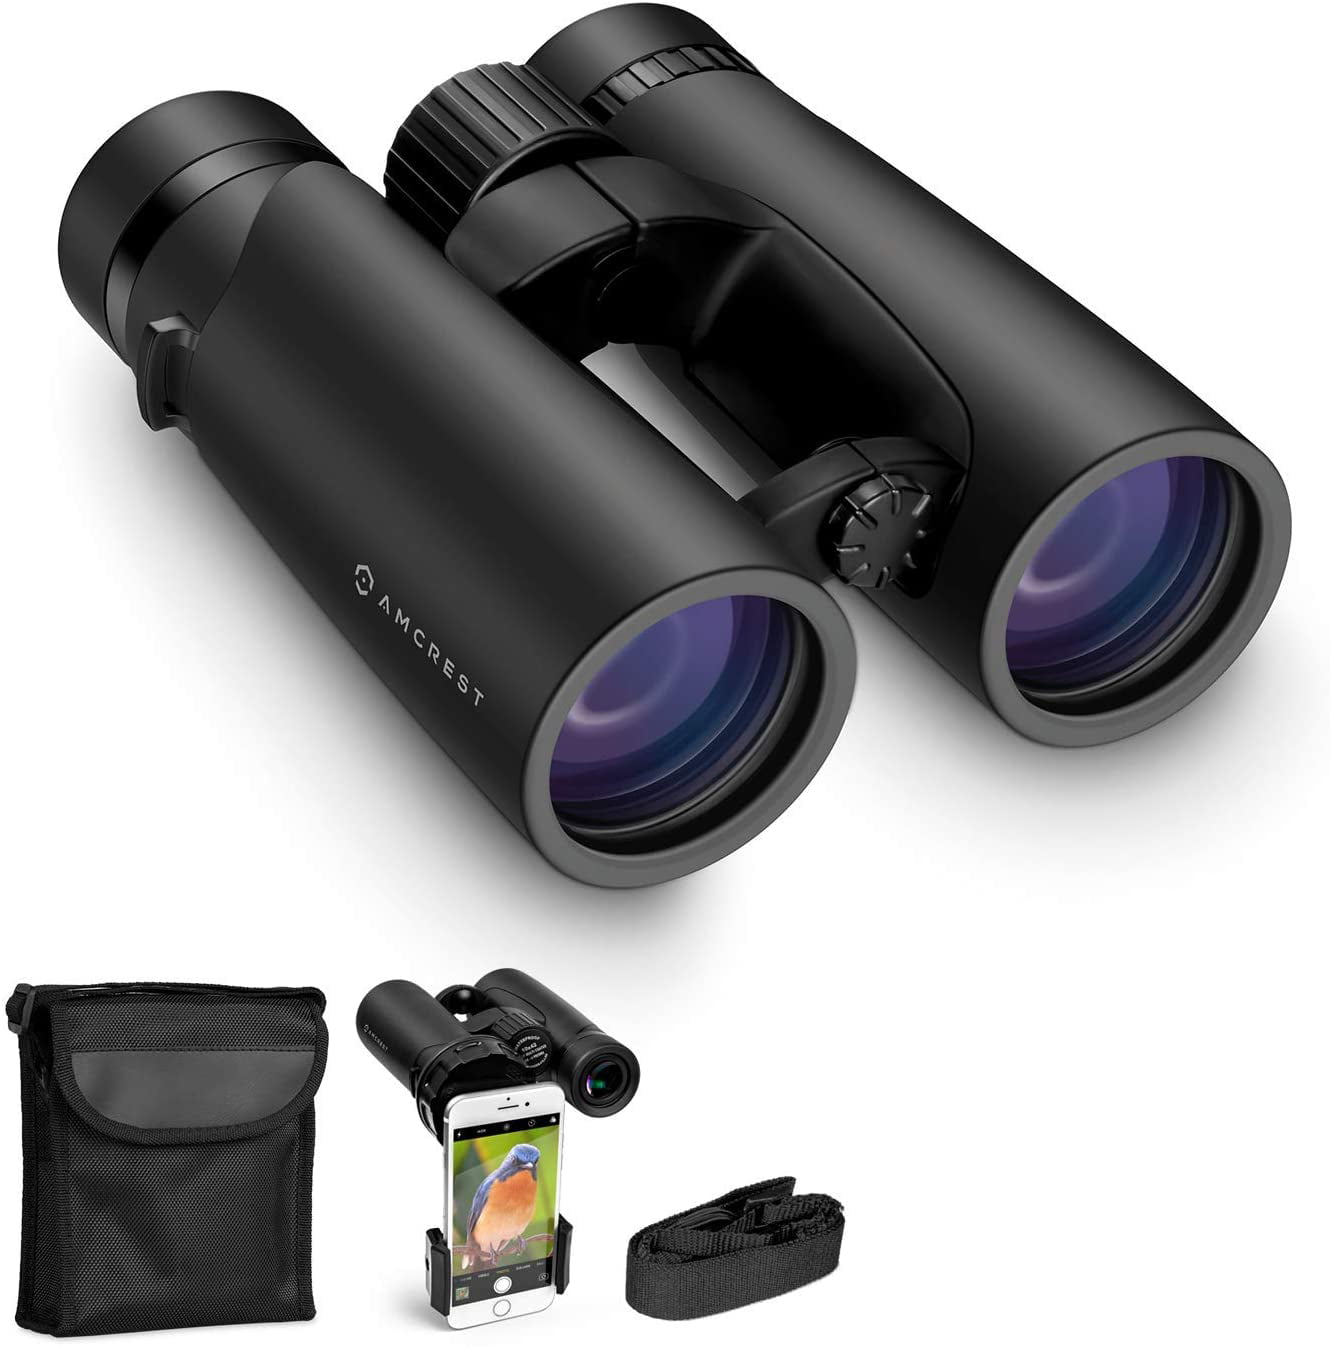 Powerful Compact Binoculars with 16.5mm Bak-4 Prism Lens Sports Usogood 10x42 Binoculars for Adults with Low Light Night Vision Hunting Waterproof HD Vision Binoculars for Bird Watching 